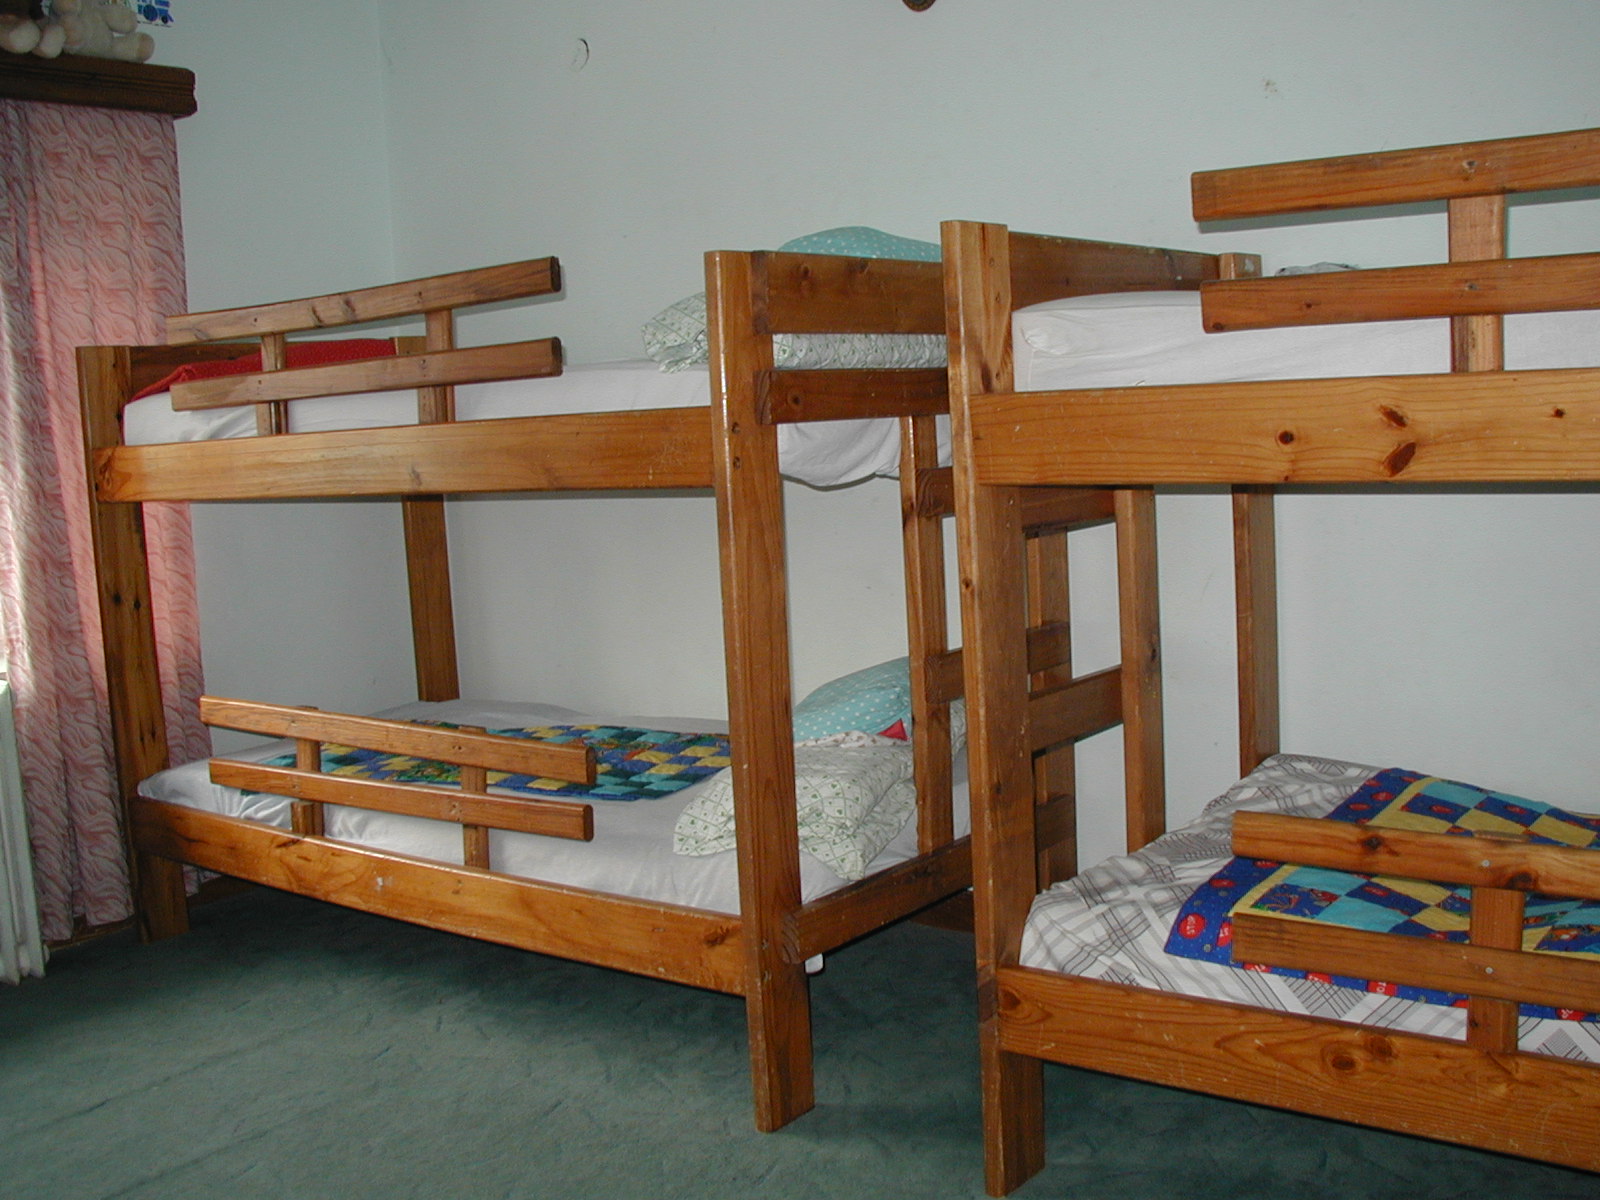 Bunk beds for the younger children at Dornesti.